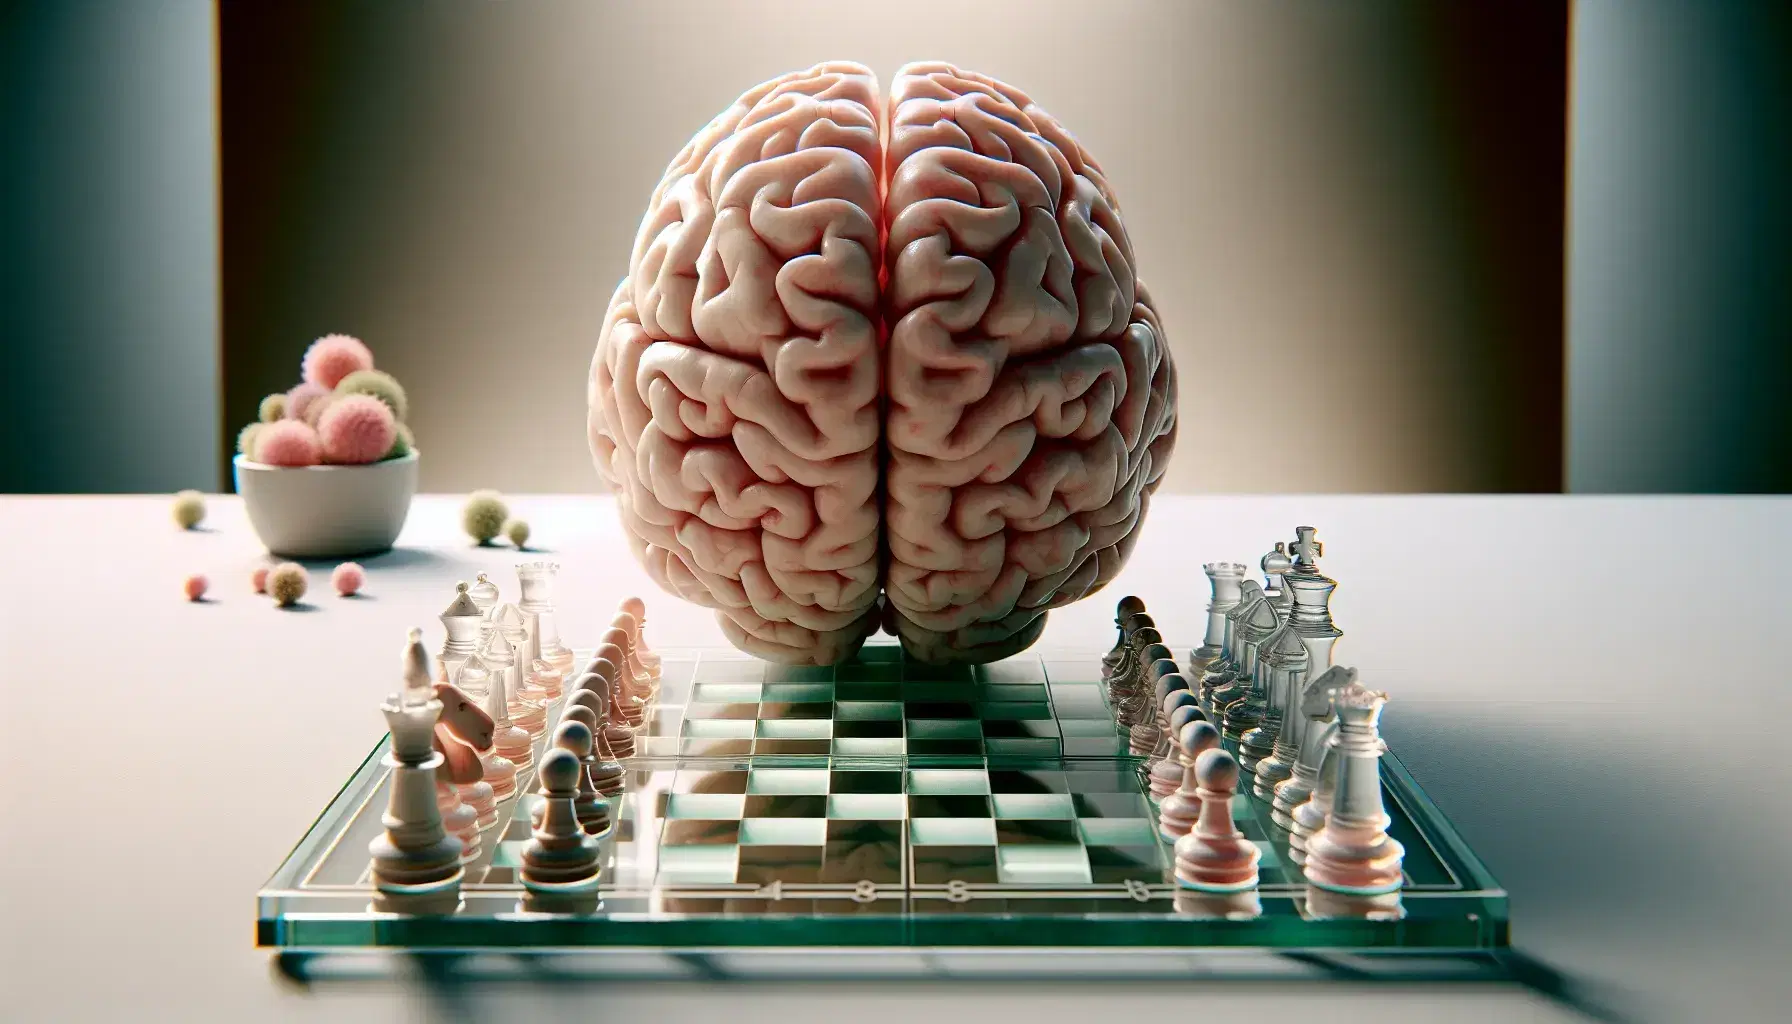 Detailed human brain model bisected to show inner structures, alongside a glass chessboard with pieces and a potted peace lily on a light background.